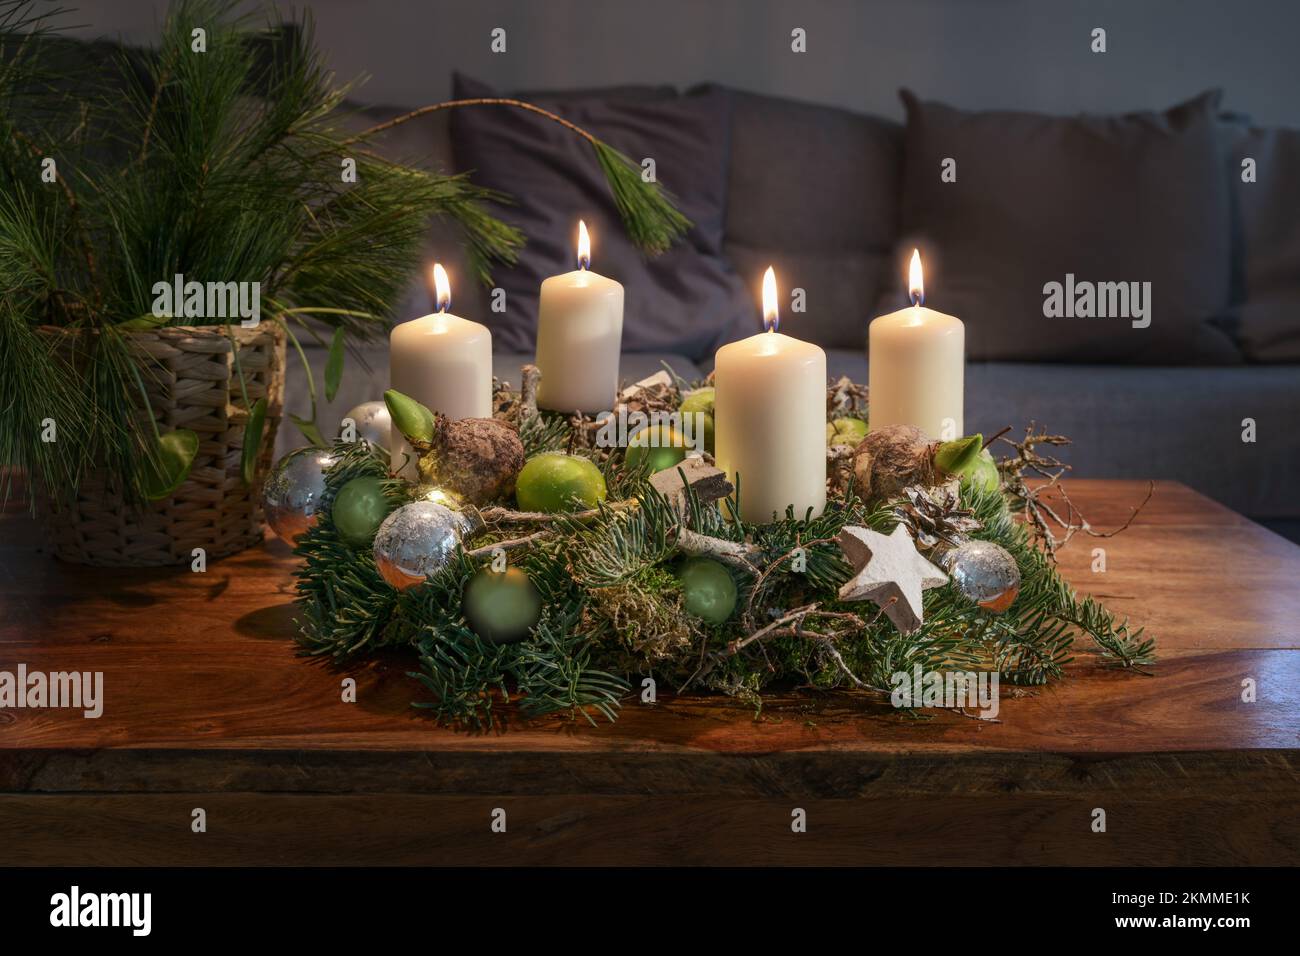 Advent wreath with four burning white candles and Christmas decoration on a wooden table in front of the couch, festive home decor, copy space, select Stock Photo